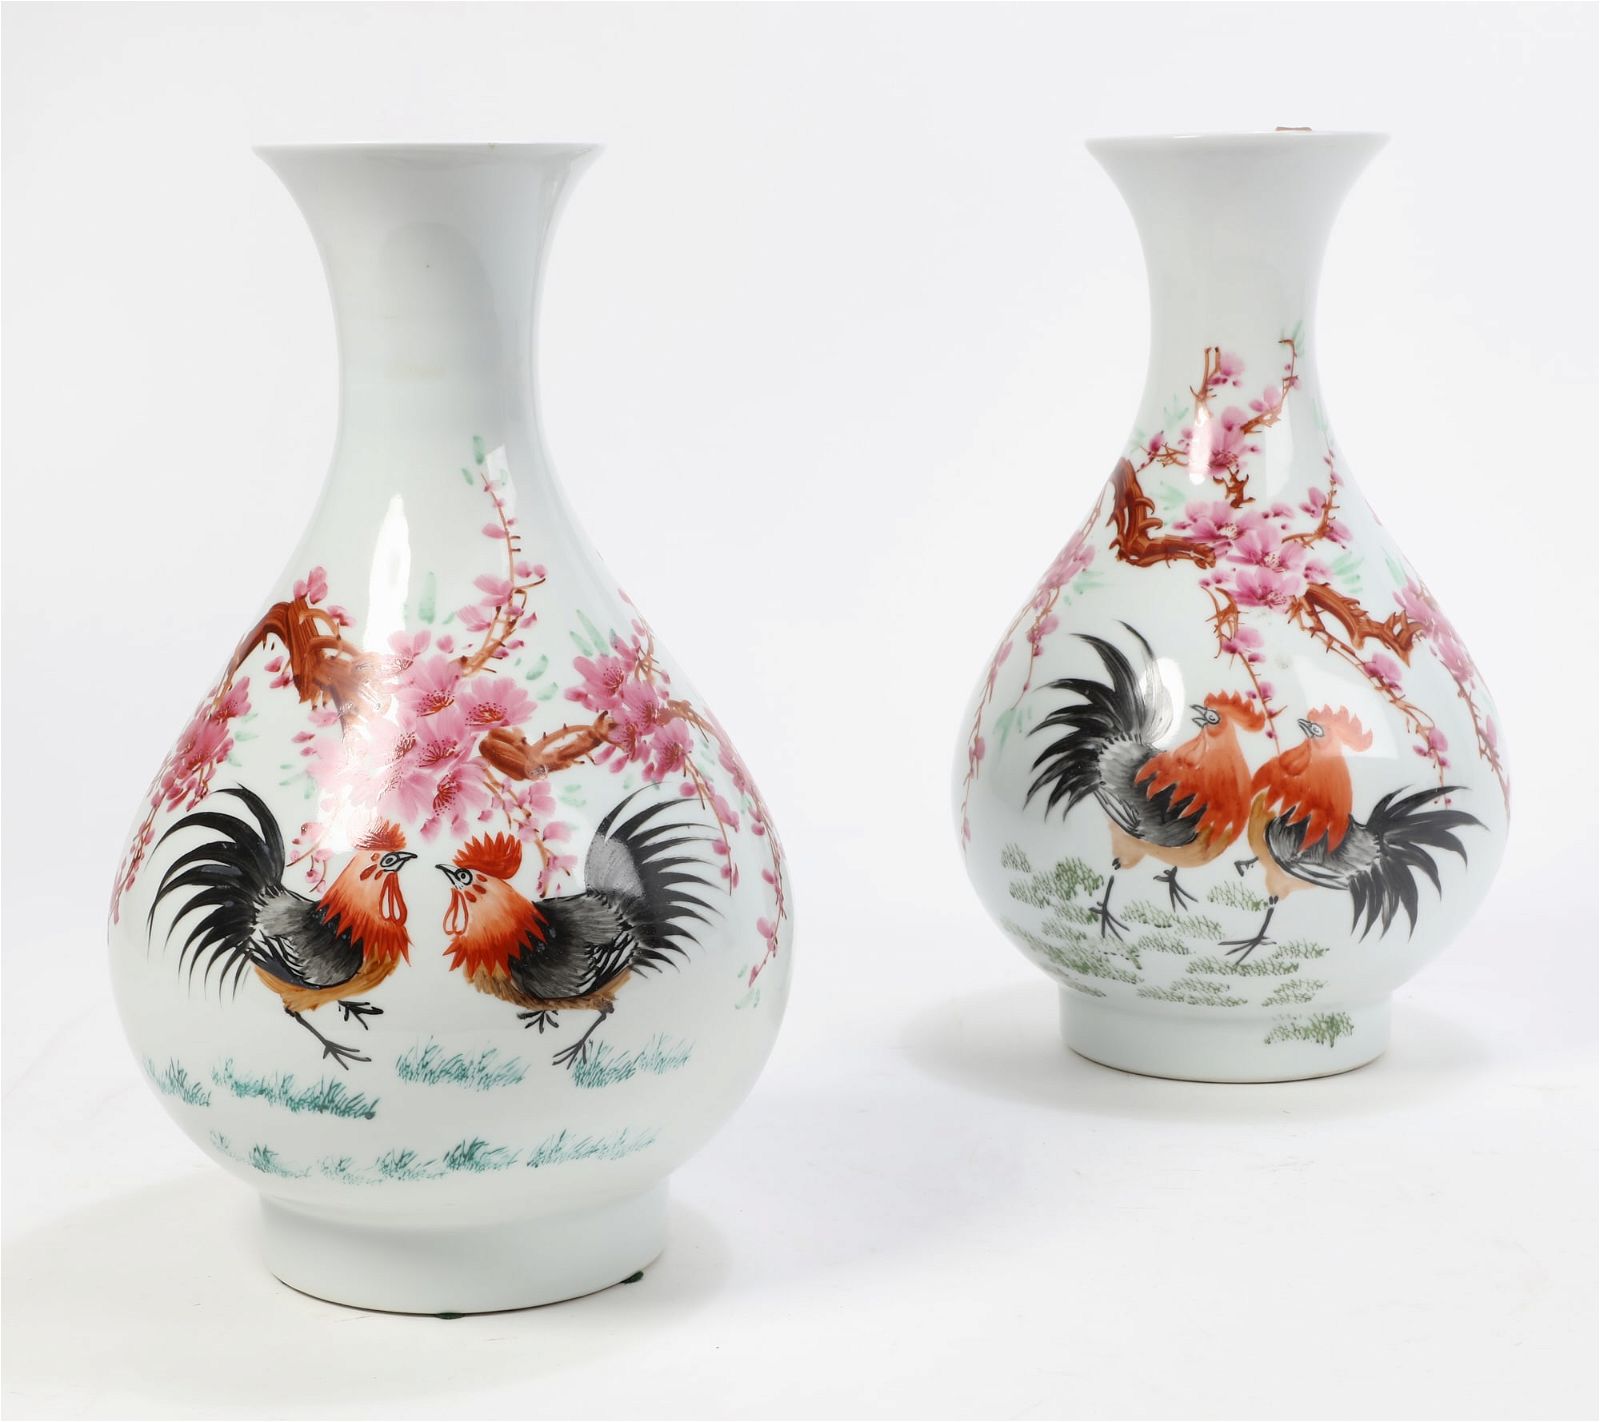 A PAIR OF CHINESE PORCELAIN VASESA 2fb3841